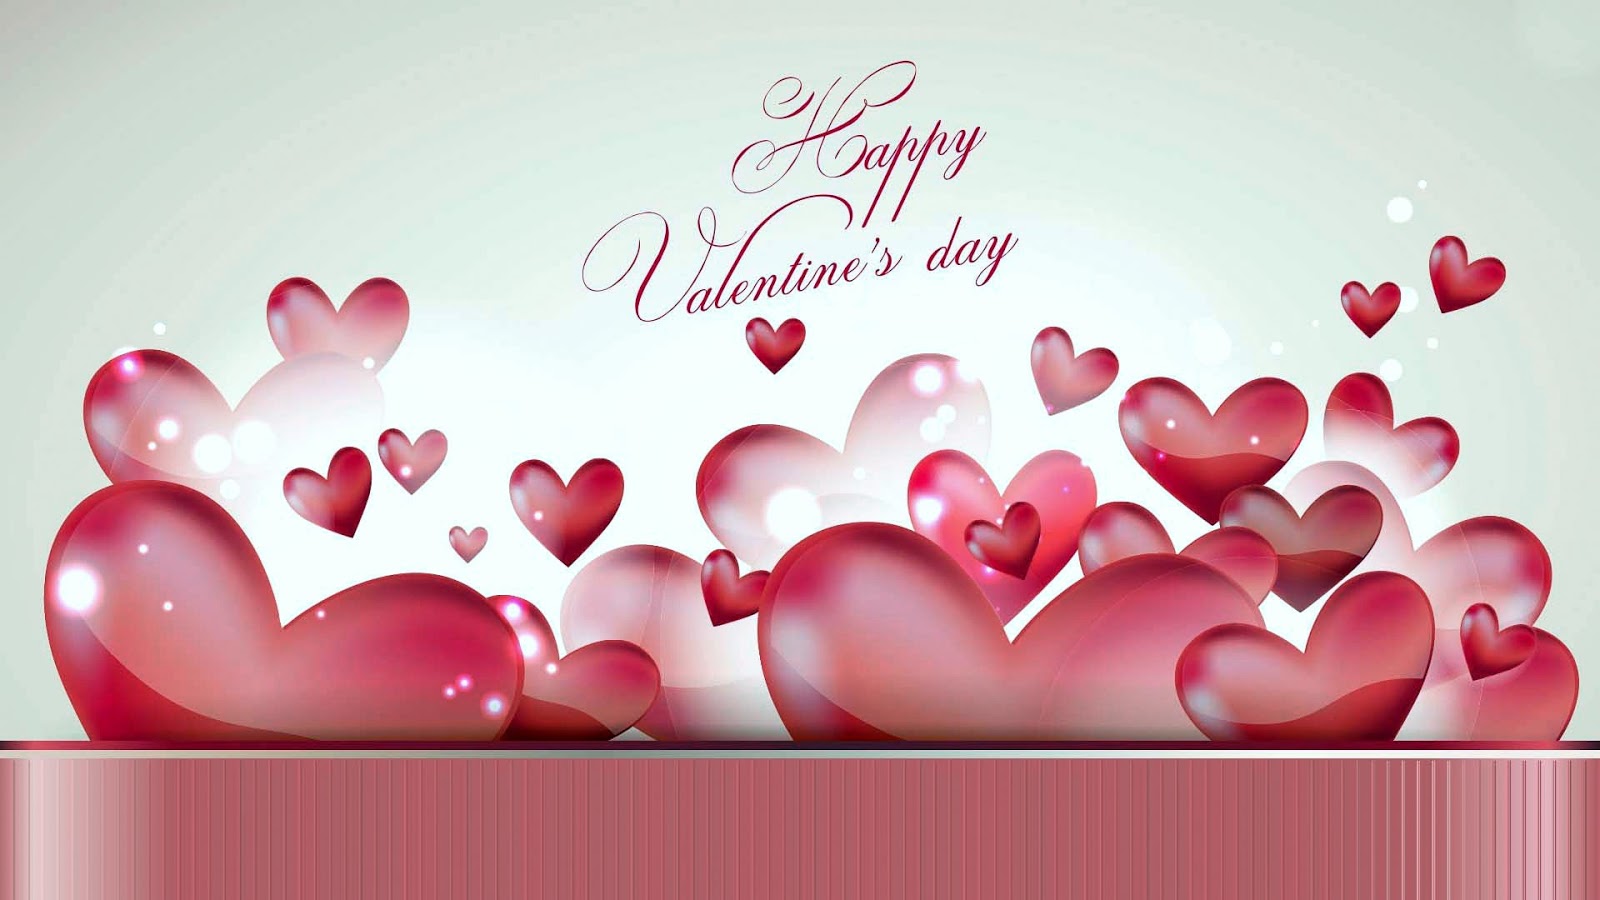 14th February 2023 Valentine's Day Wishing Cards Images Pics